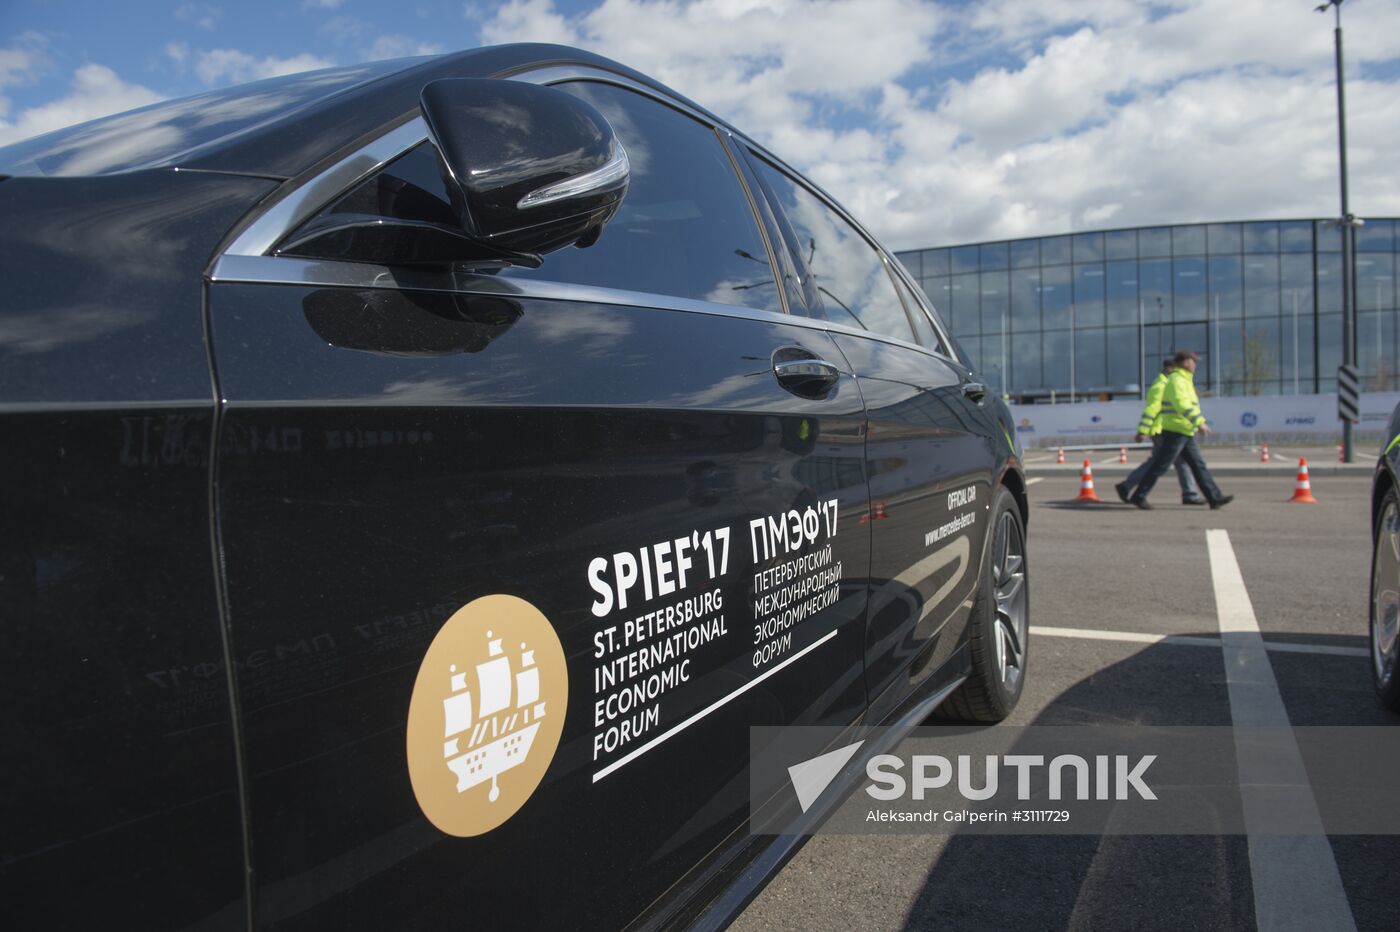 Drivers practice arrival at SPIEF 2017